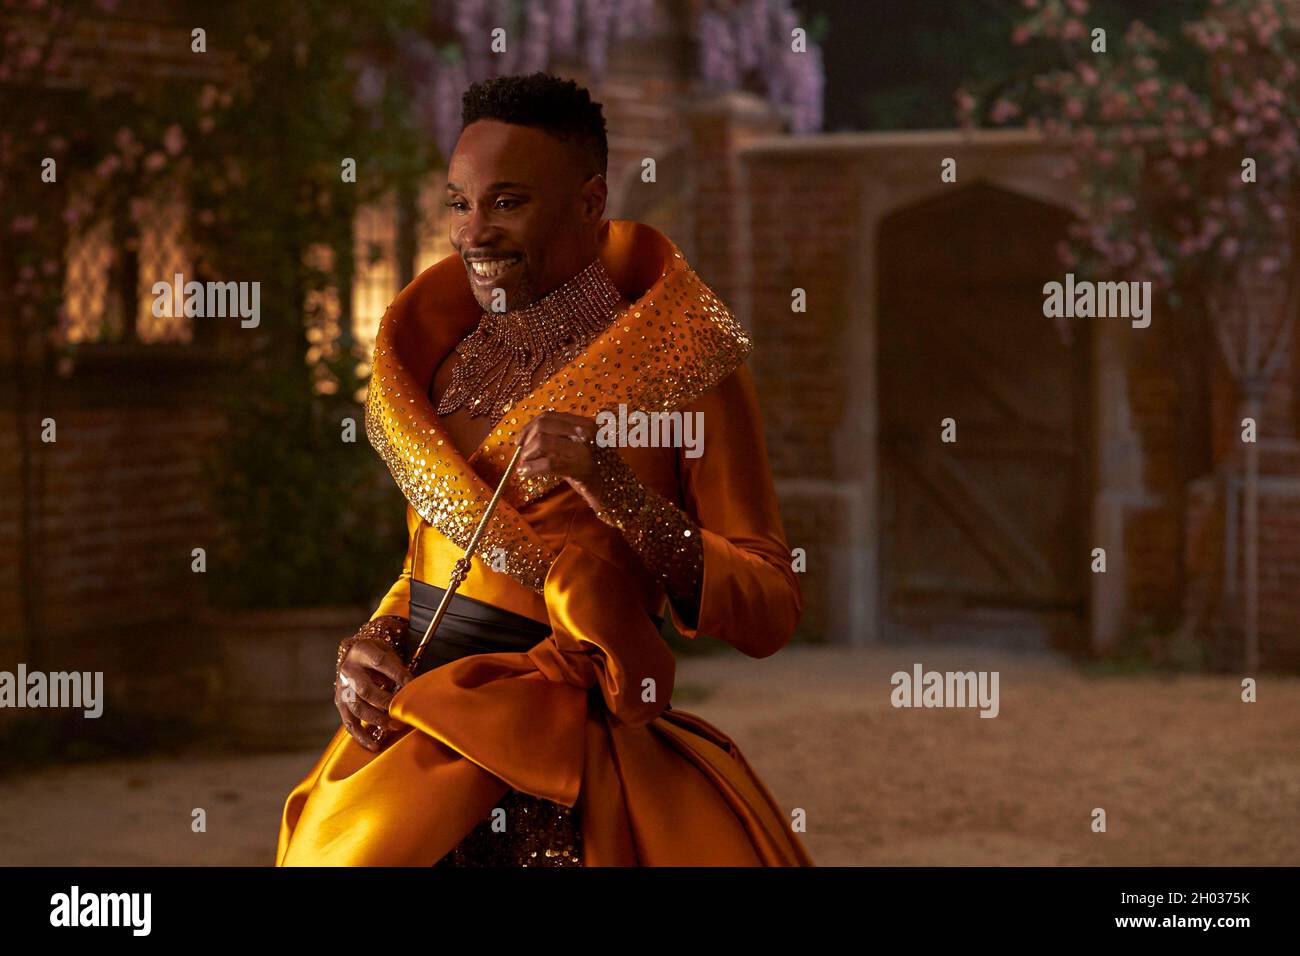 BILLY PORTER in CINDERELLA (2021), Regie: KAY CANNON. Kredit: Columbia Pictures / Sony Pictures Entertainment / Album Stockfoto